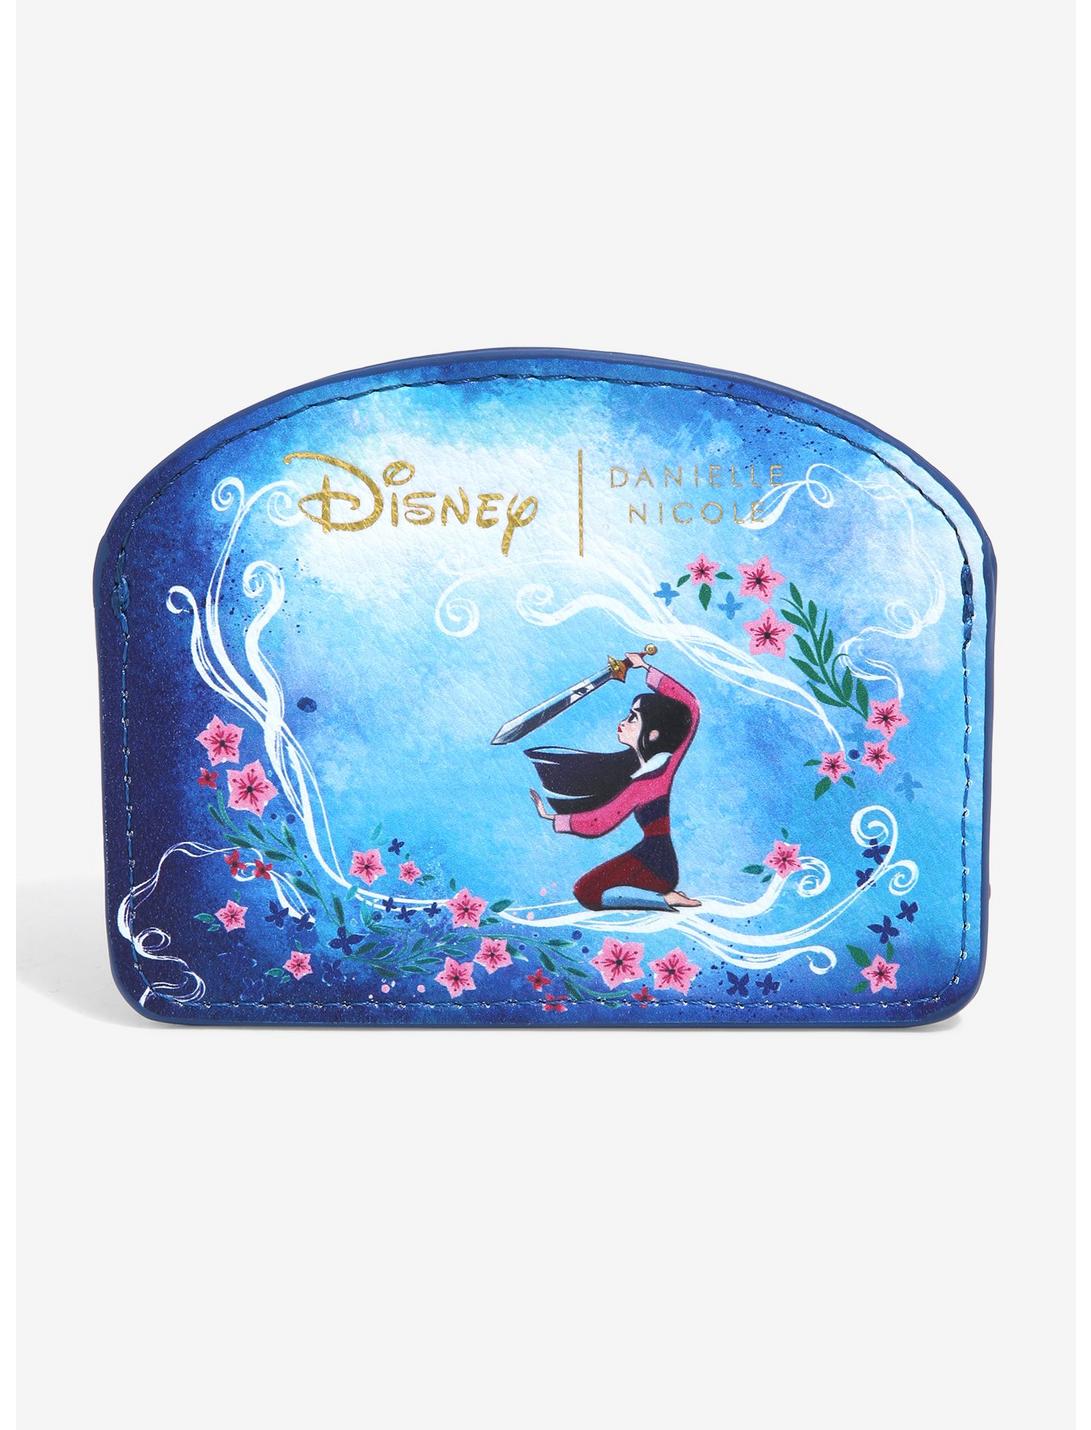 Mulan Bags From Danielle Nicole And More Disney Diary